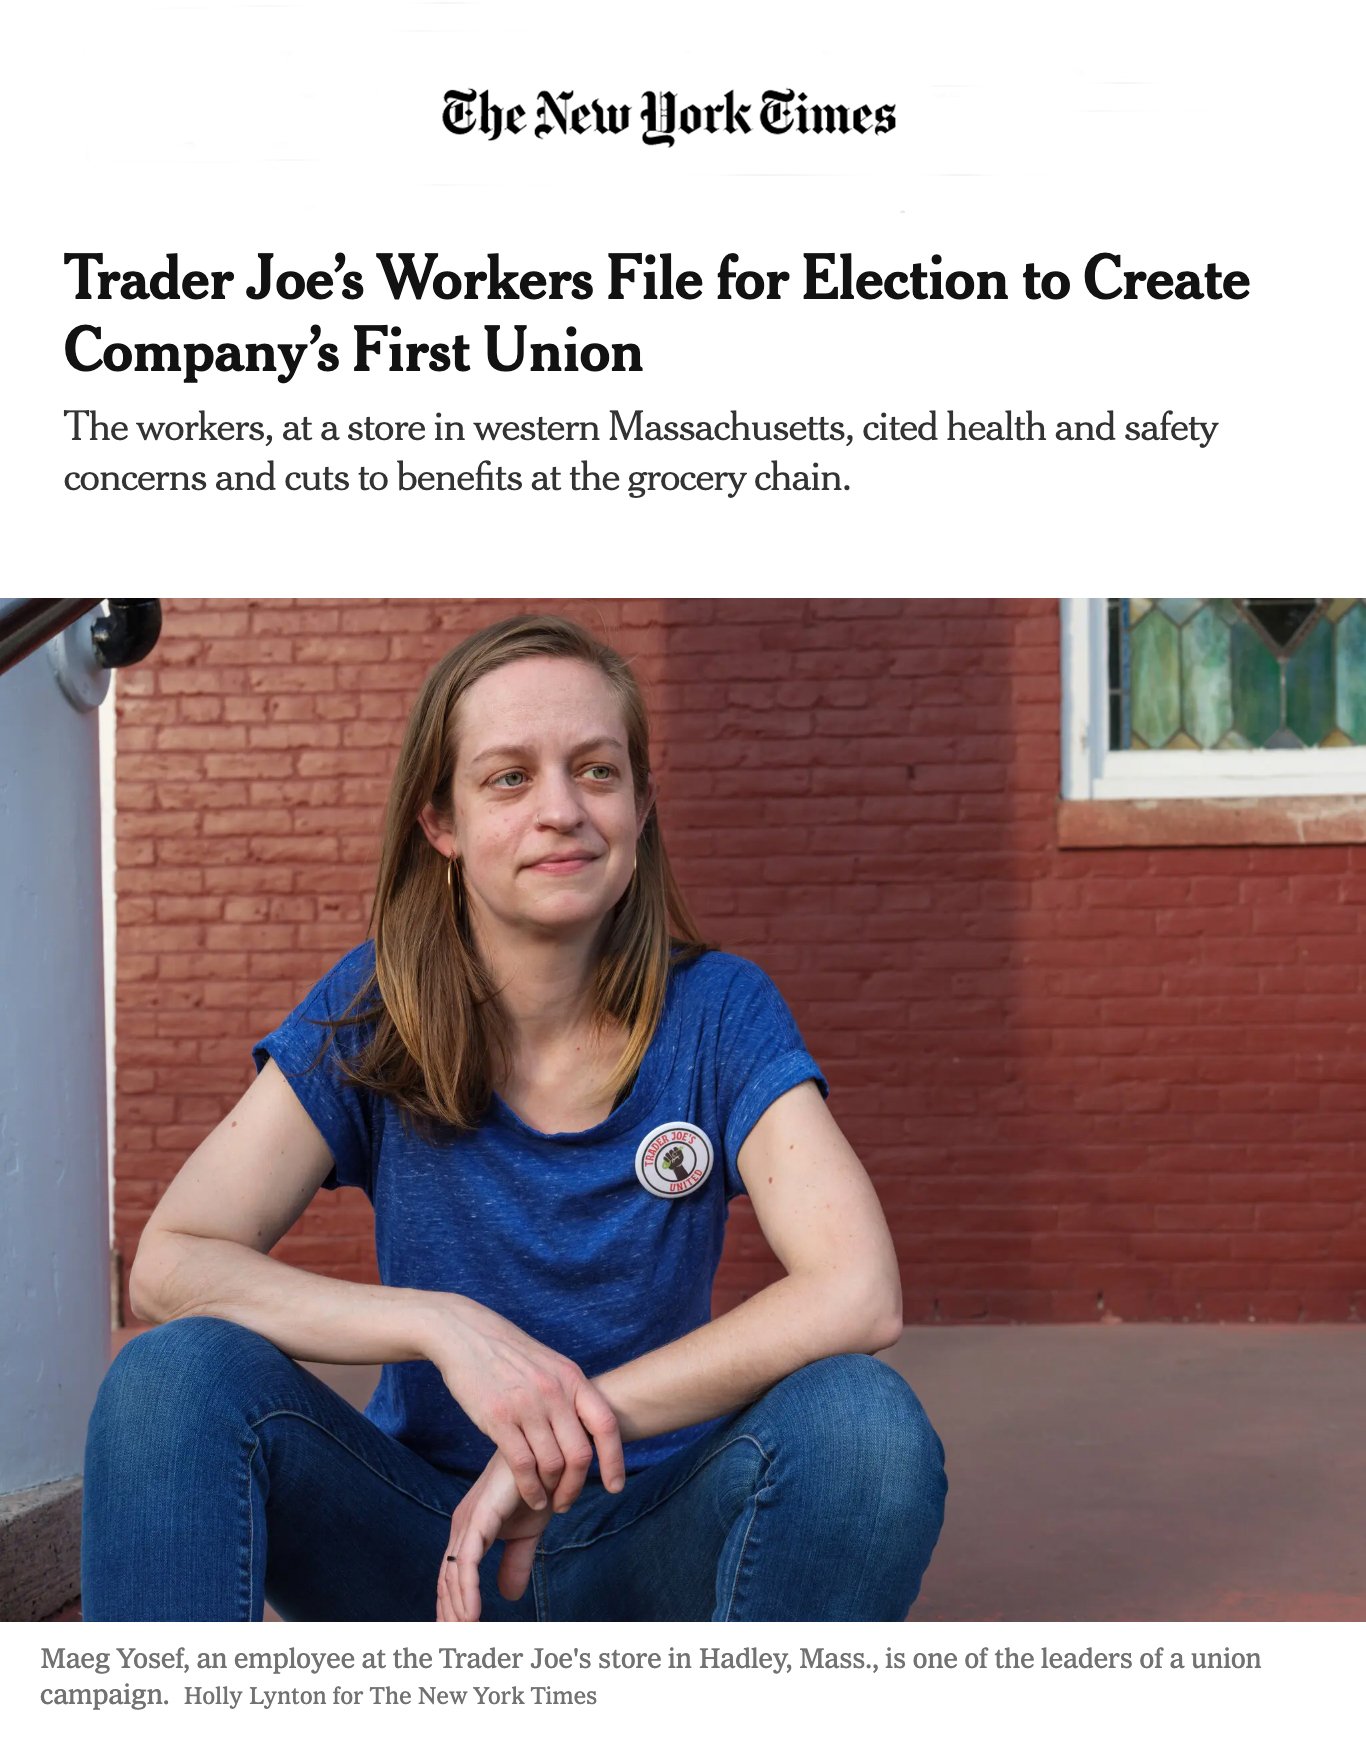  “Trader Joe’s Workers File for Election to Create Company’s First Union,” The New York Times, June 8th, 2022 